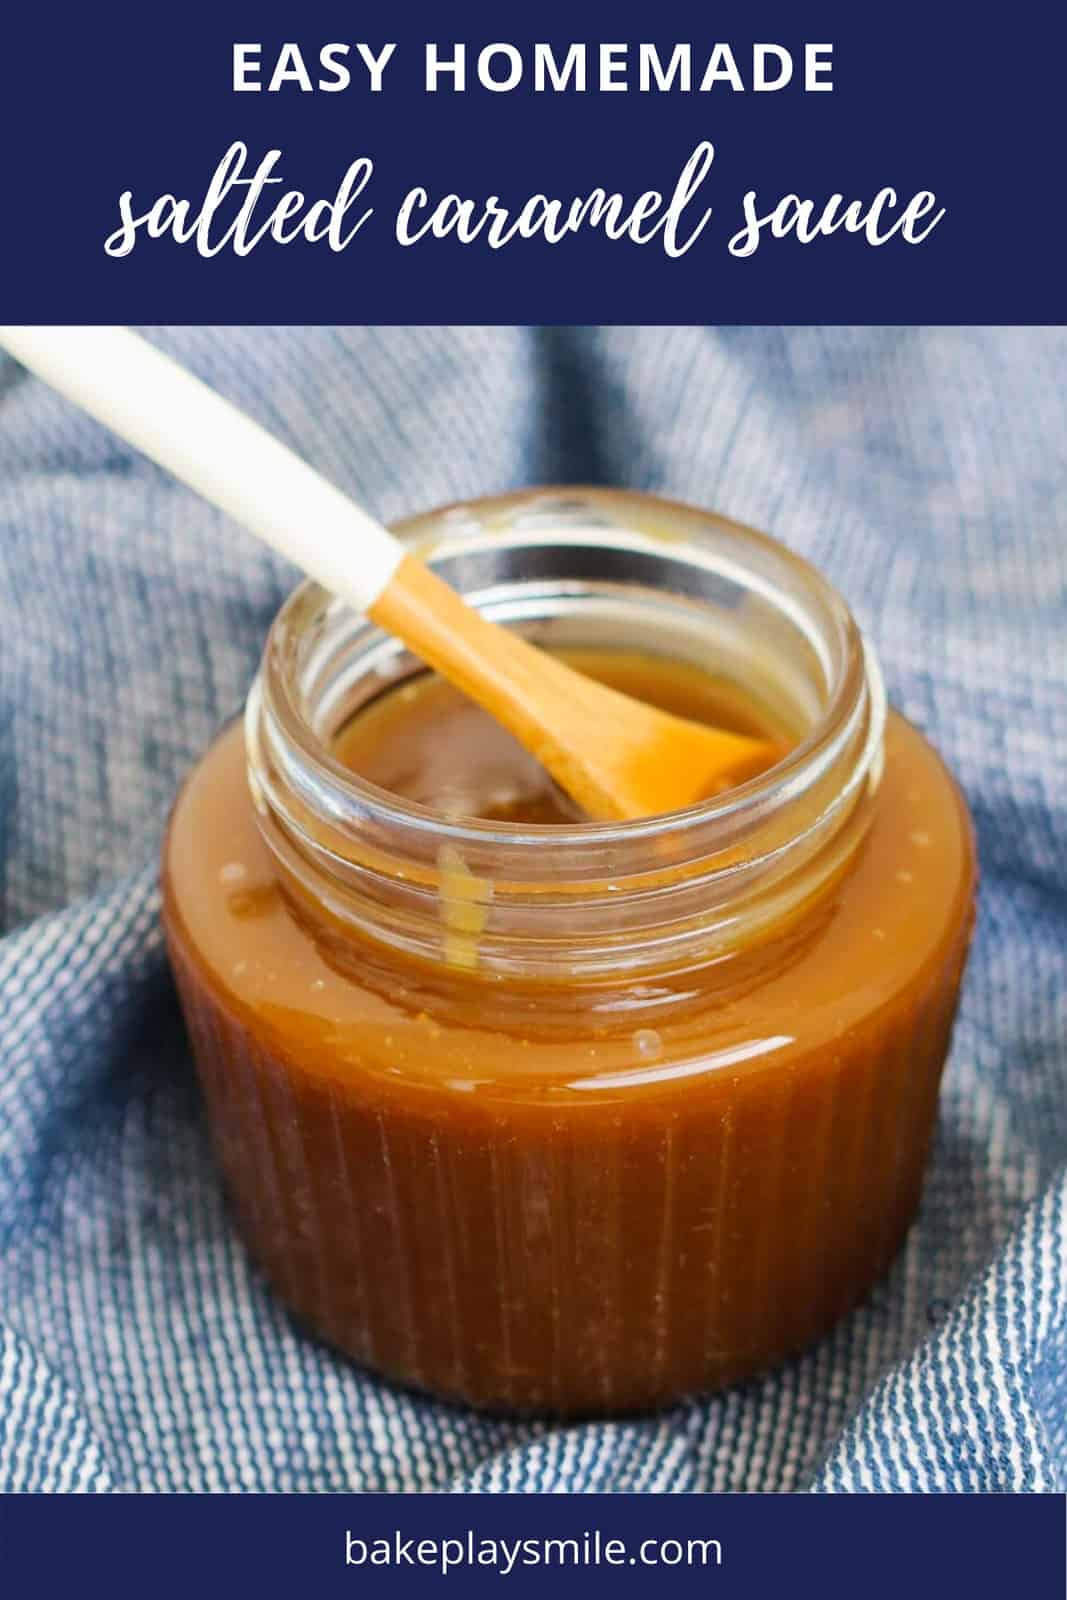 Homemade caramel sauce in a glass jar with a small wooden spoon dipped in.